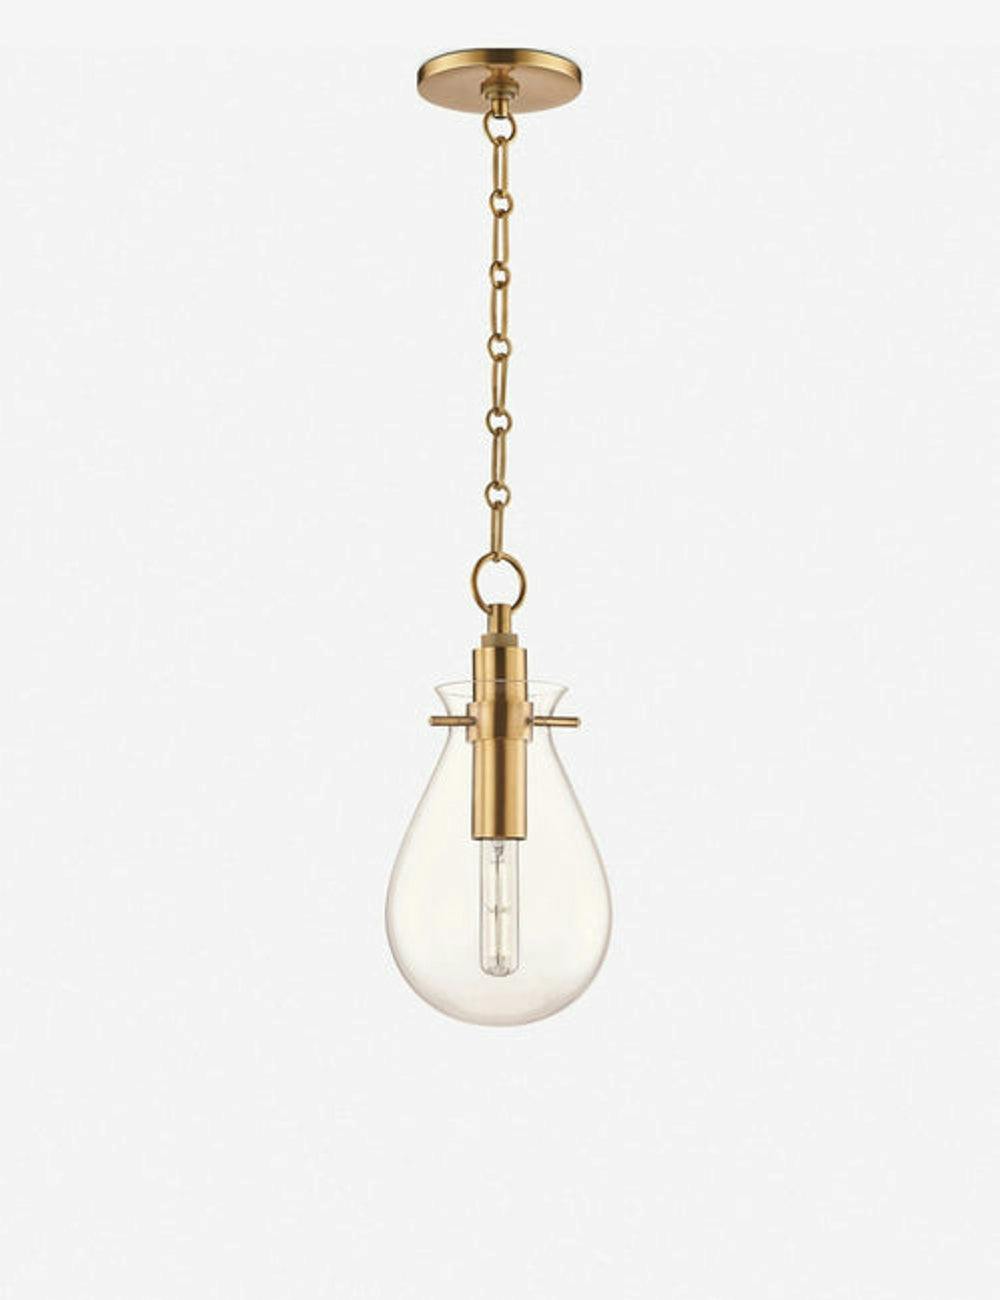 Elegant Aged Brass and Glass LED Pendant Light for Indoor/Outdoor